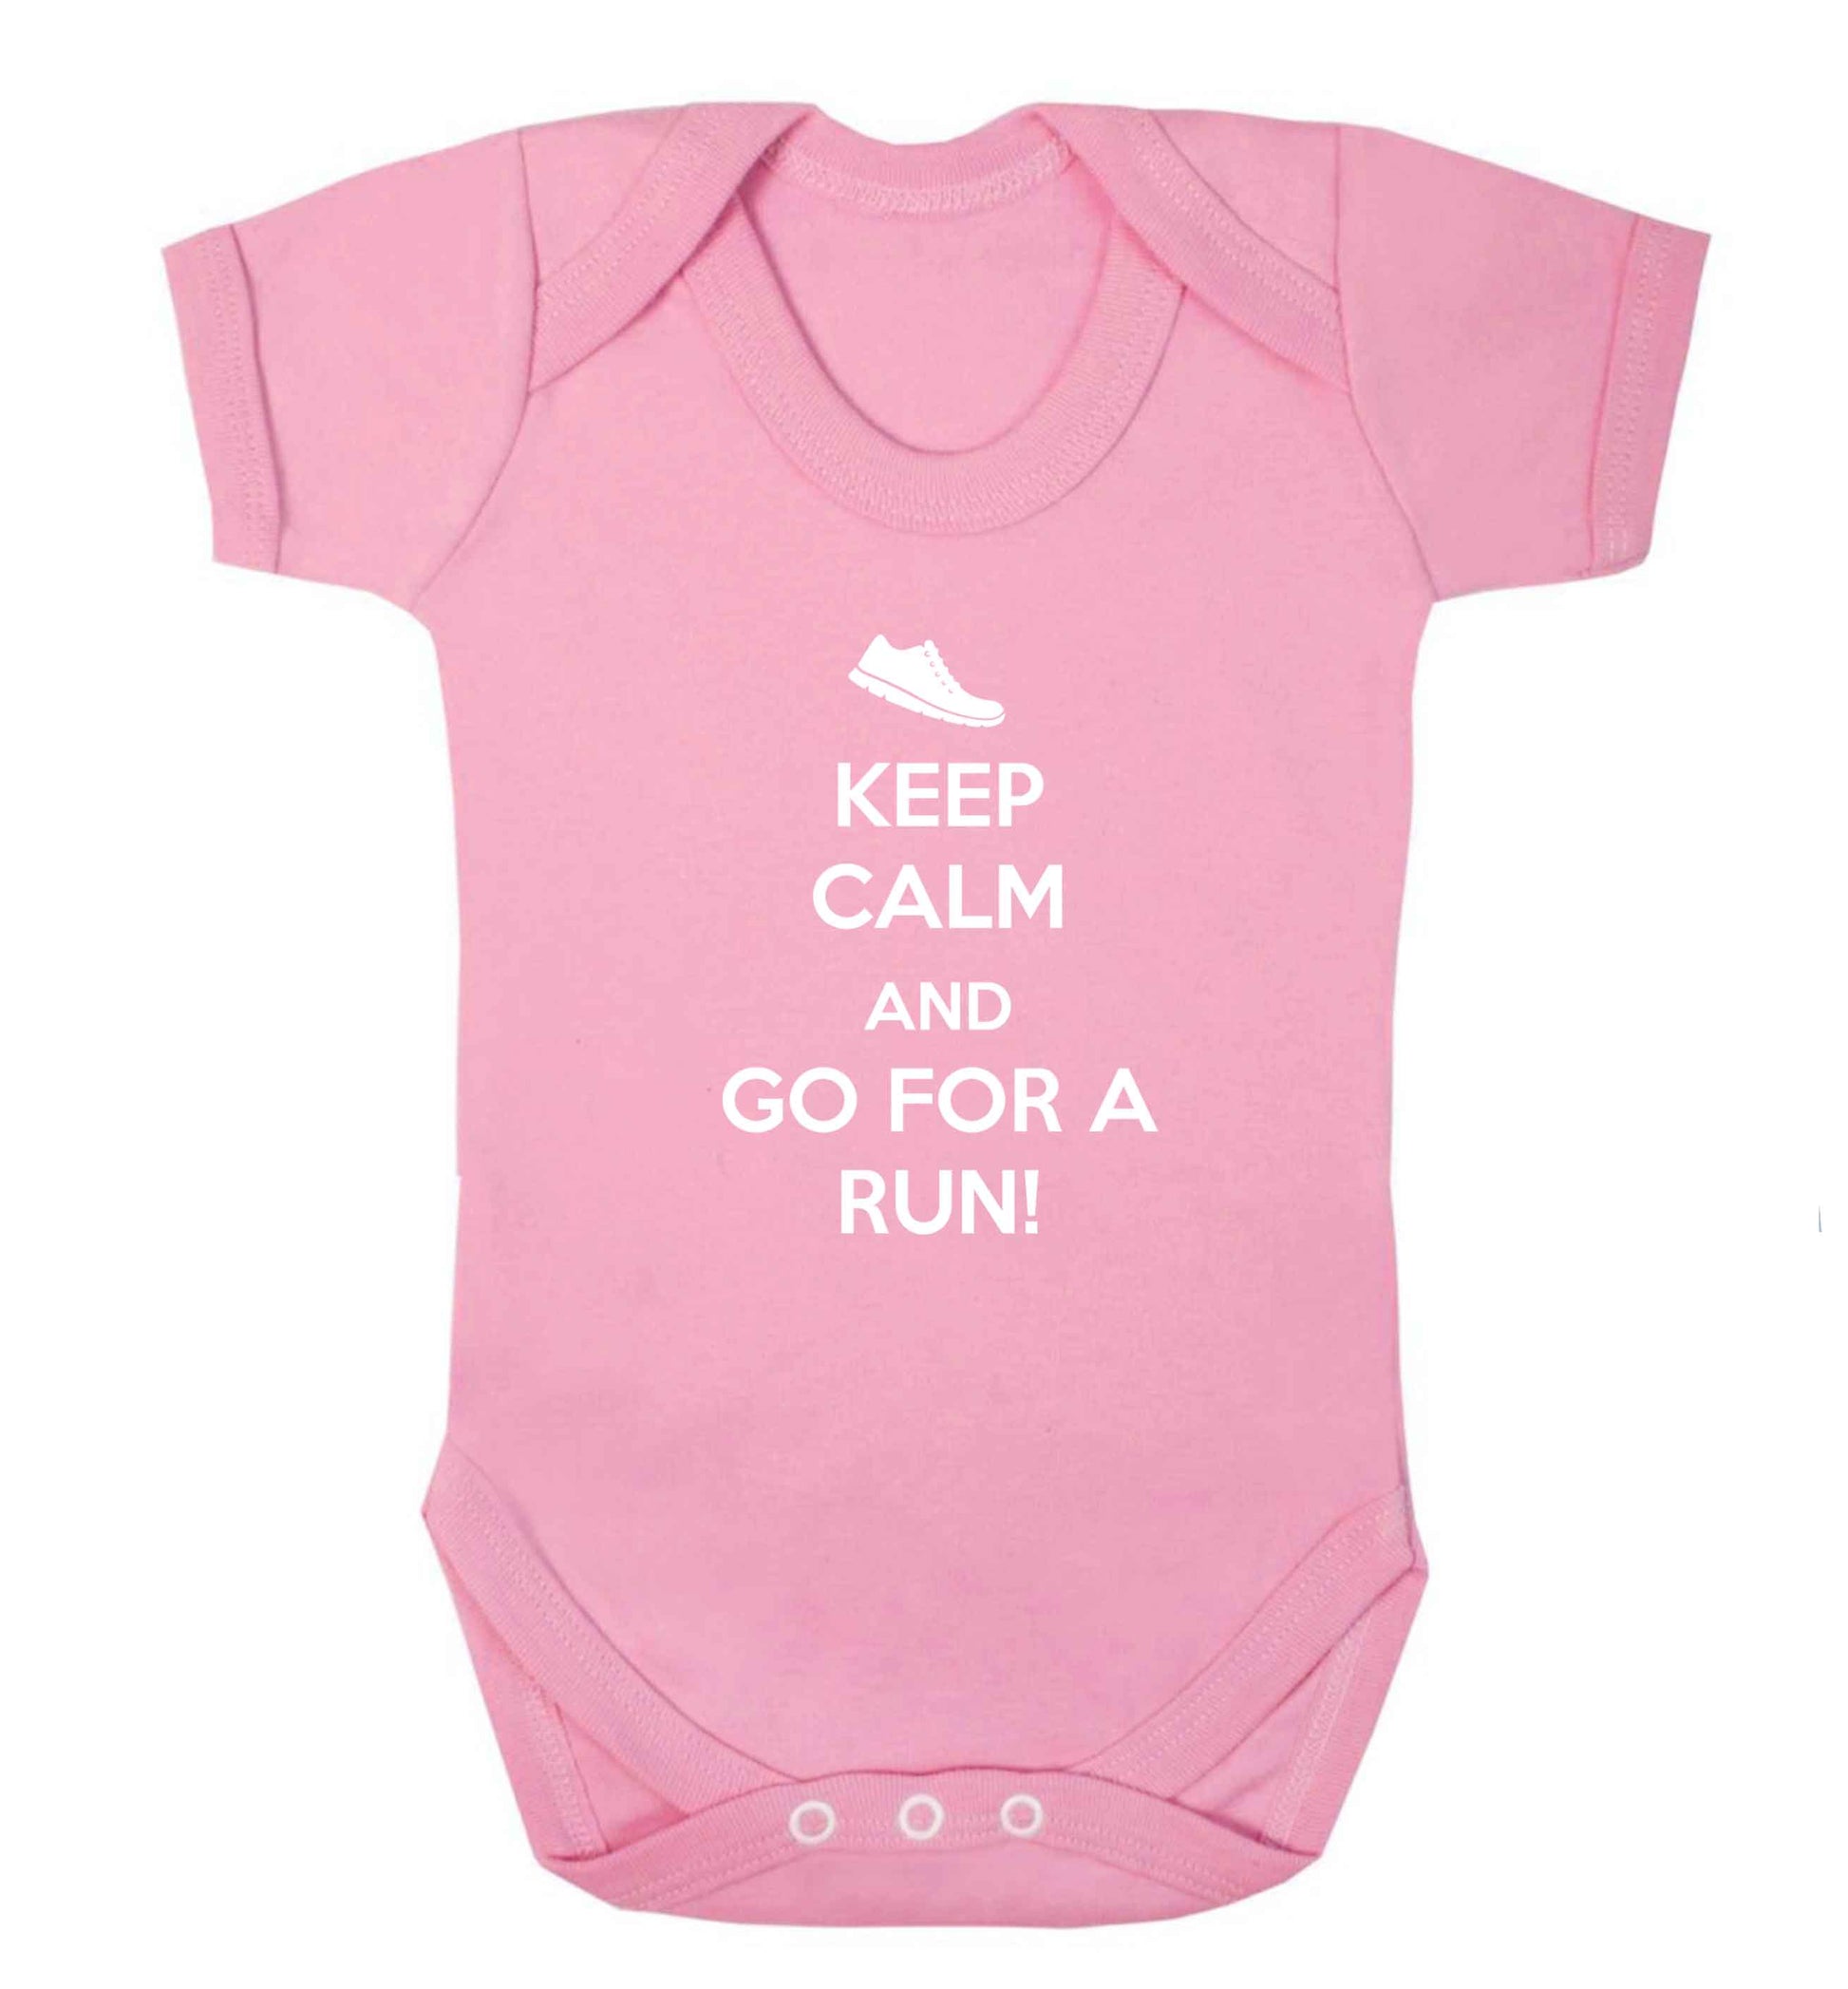 Keep calm and go for a run baby vest pale pink 18-24 months